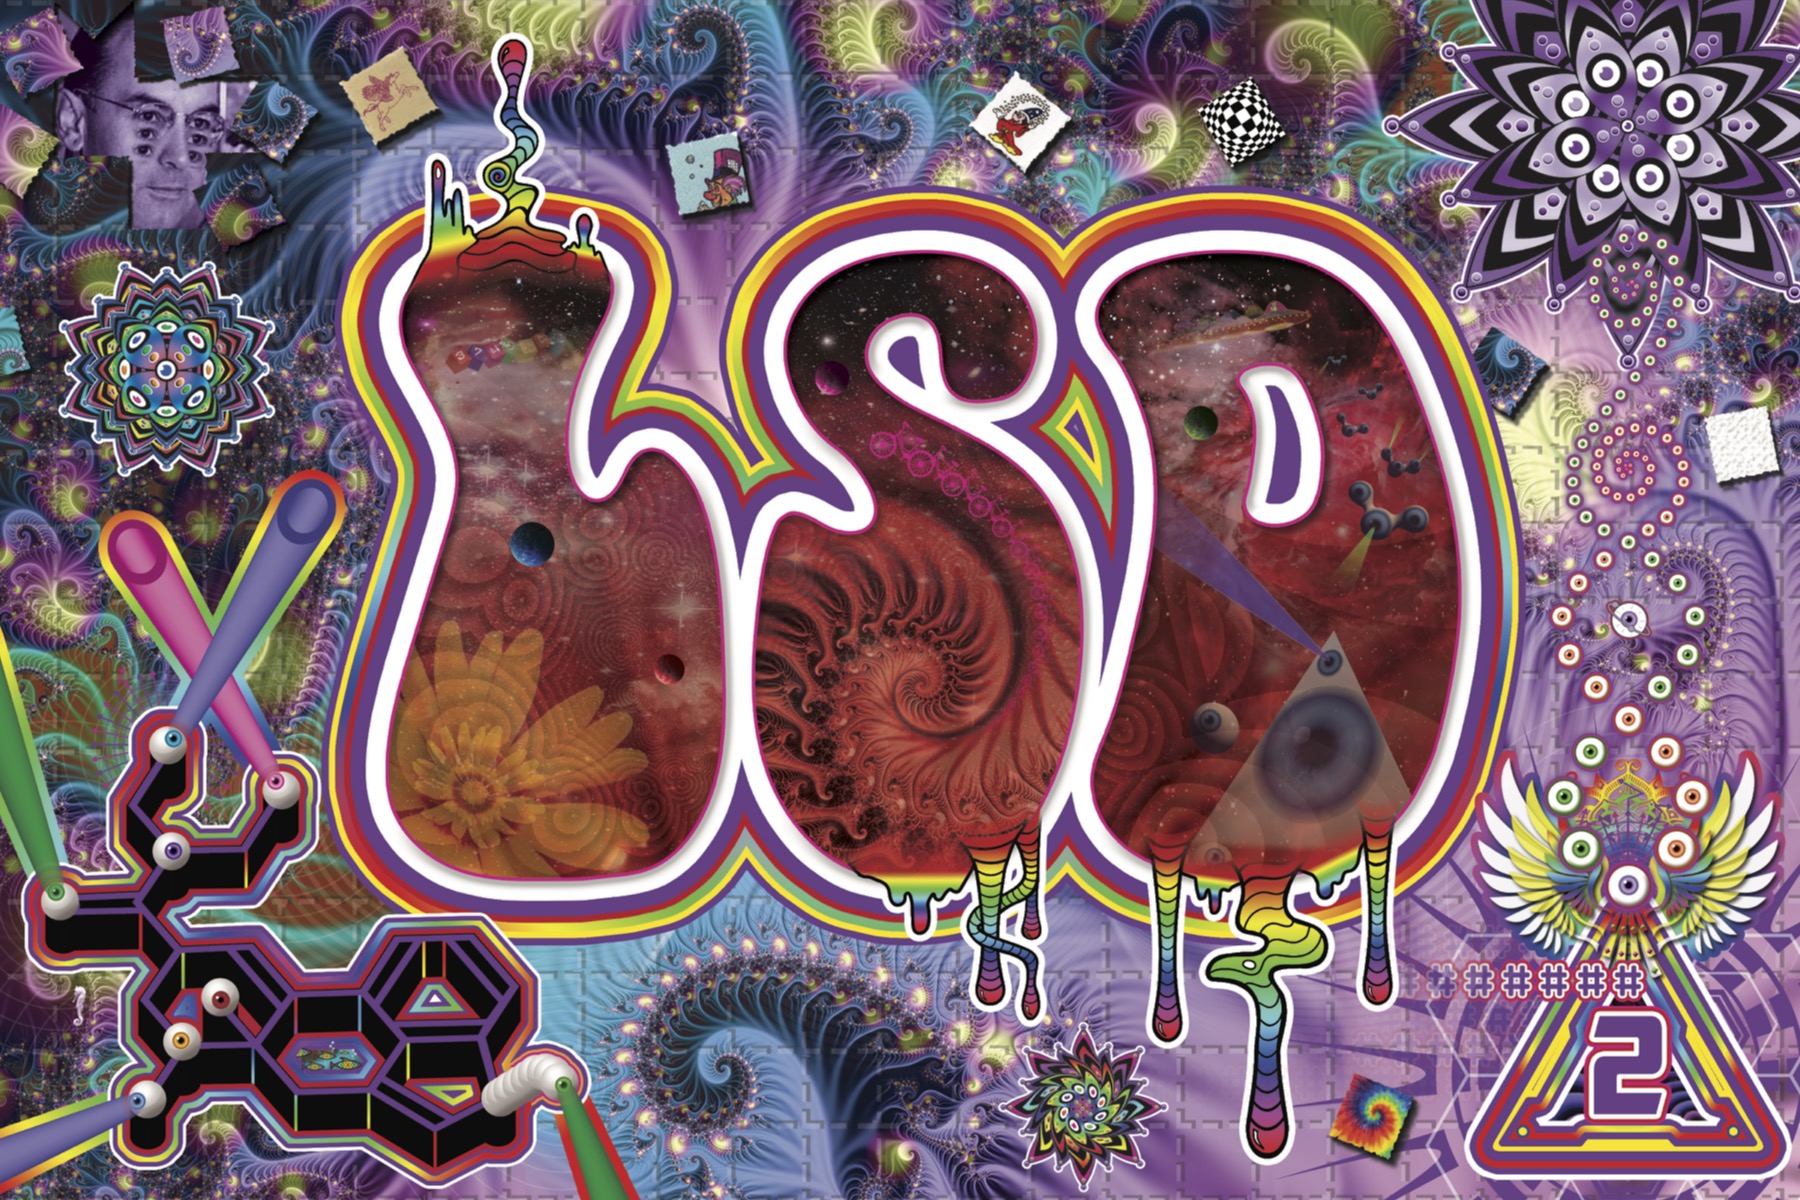 The front of the DanceSafe LSD card, with psychedelic visuals.